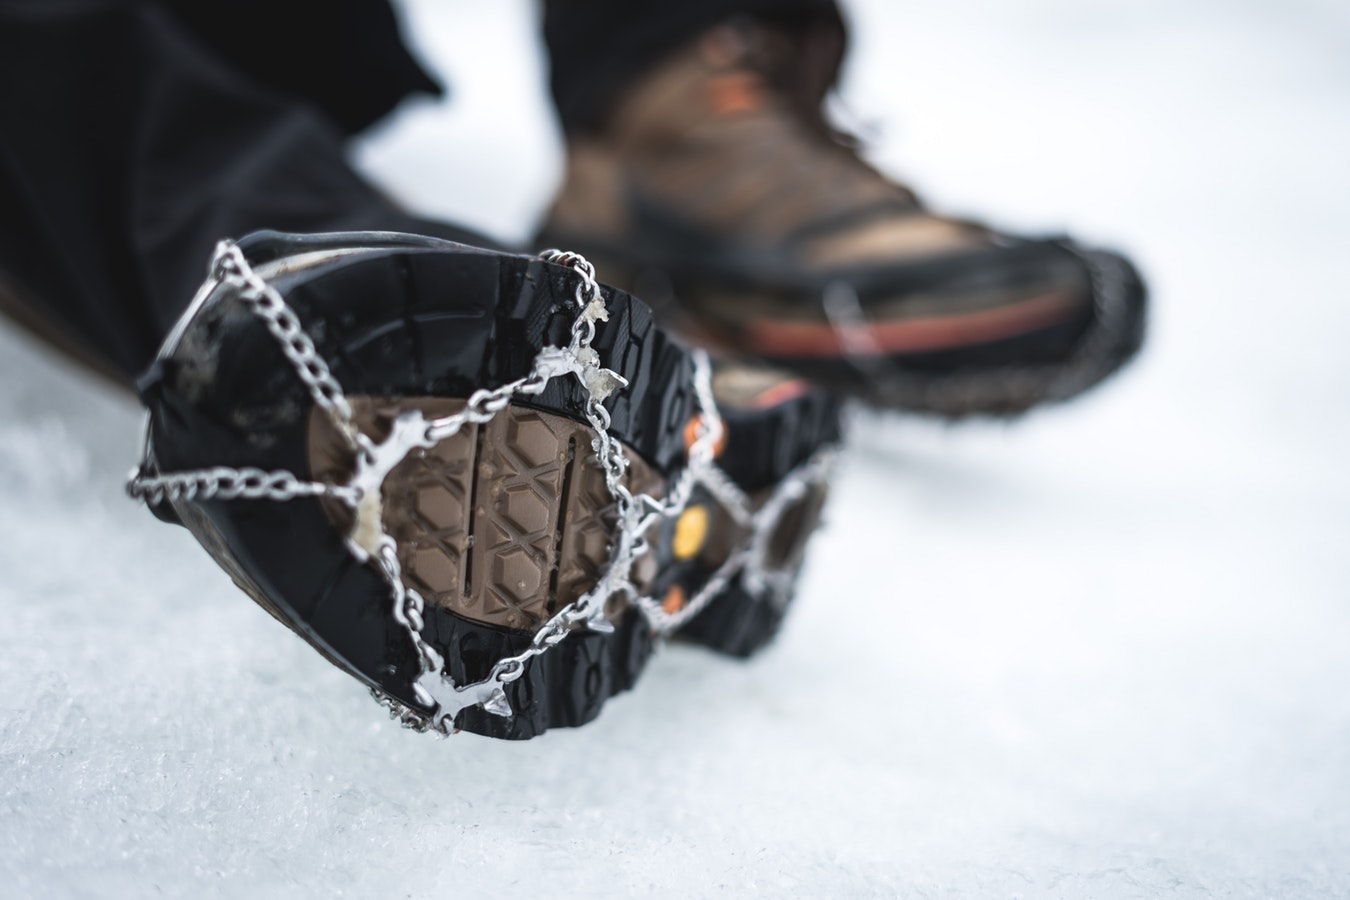 An In Depth Review of the Best Shoes for Walking on Ice of 2018